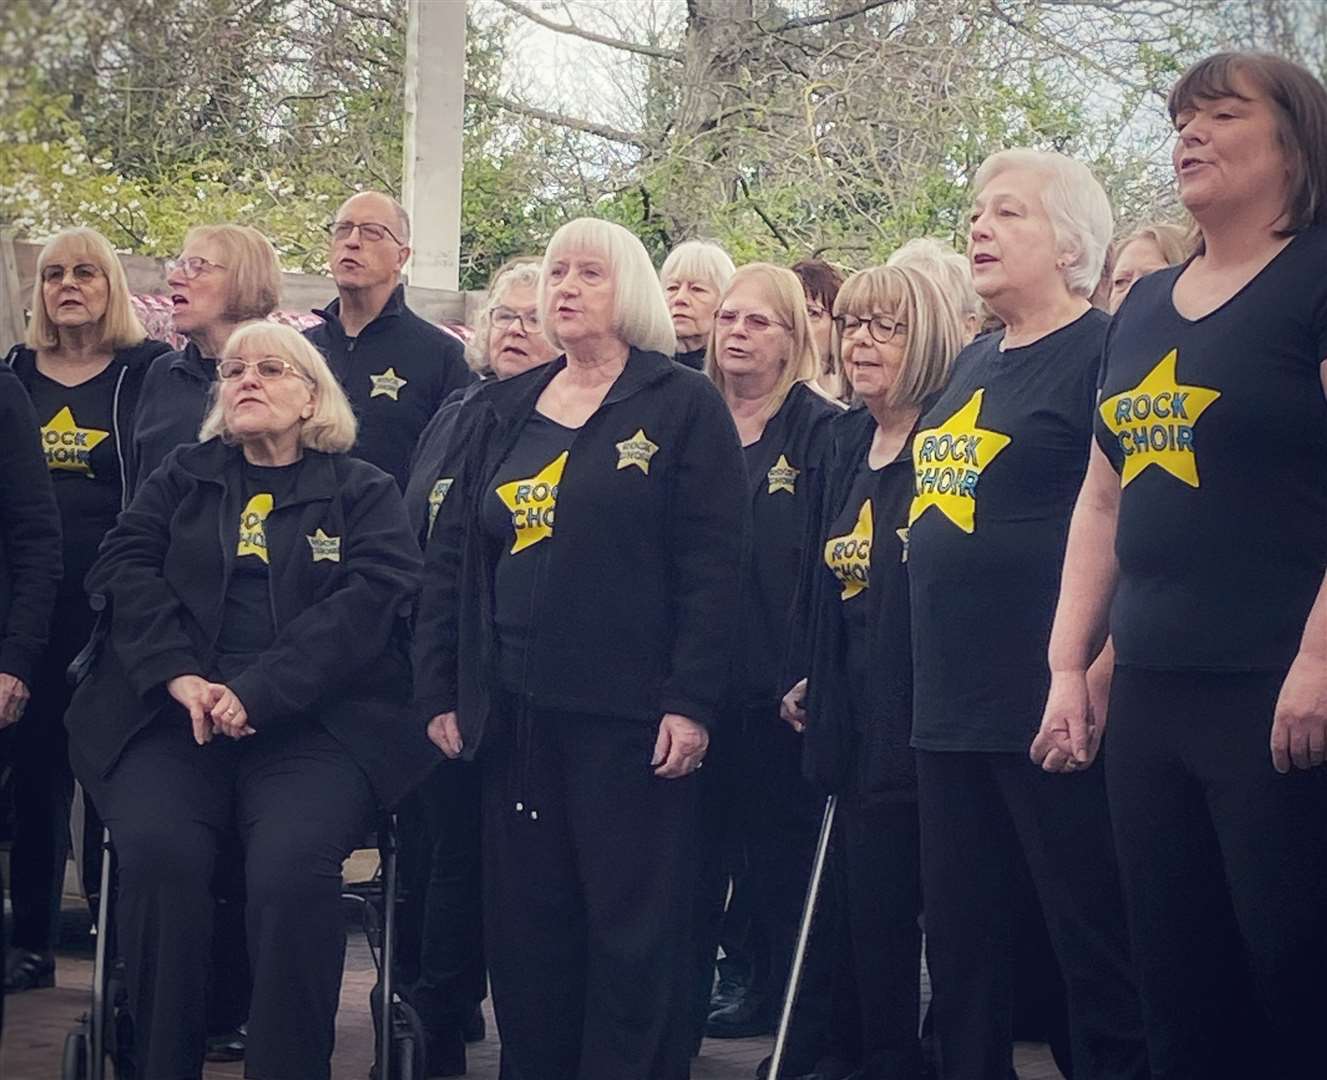 Rock Choir Kent singing their hearts out at Millbrook Gravesend’s 30th birthday celebrations. Photo: Millbrook Garden Company